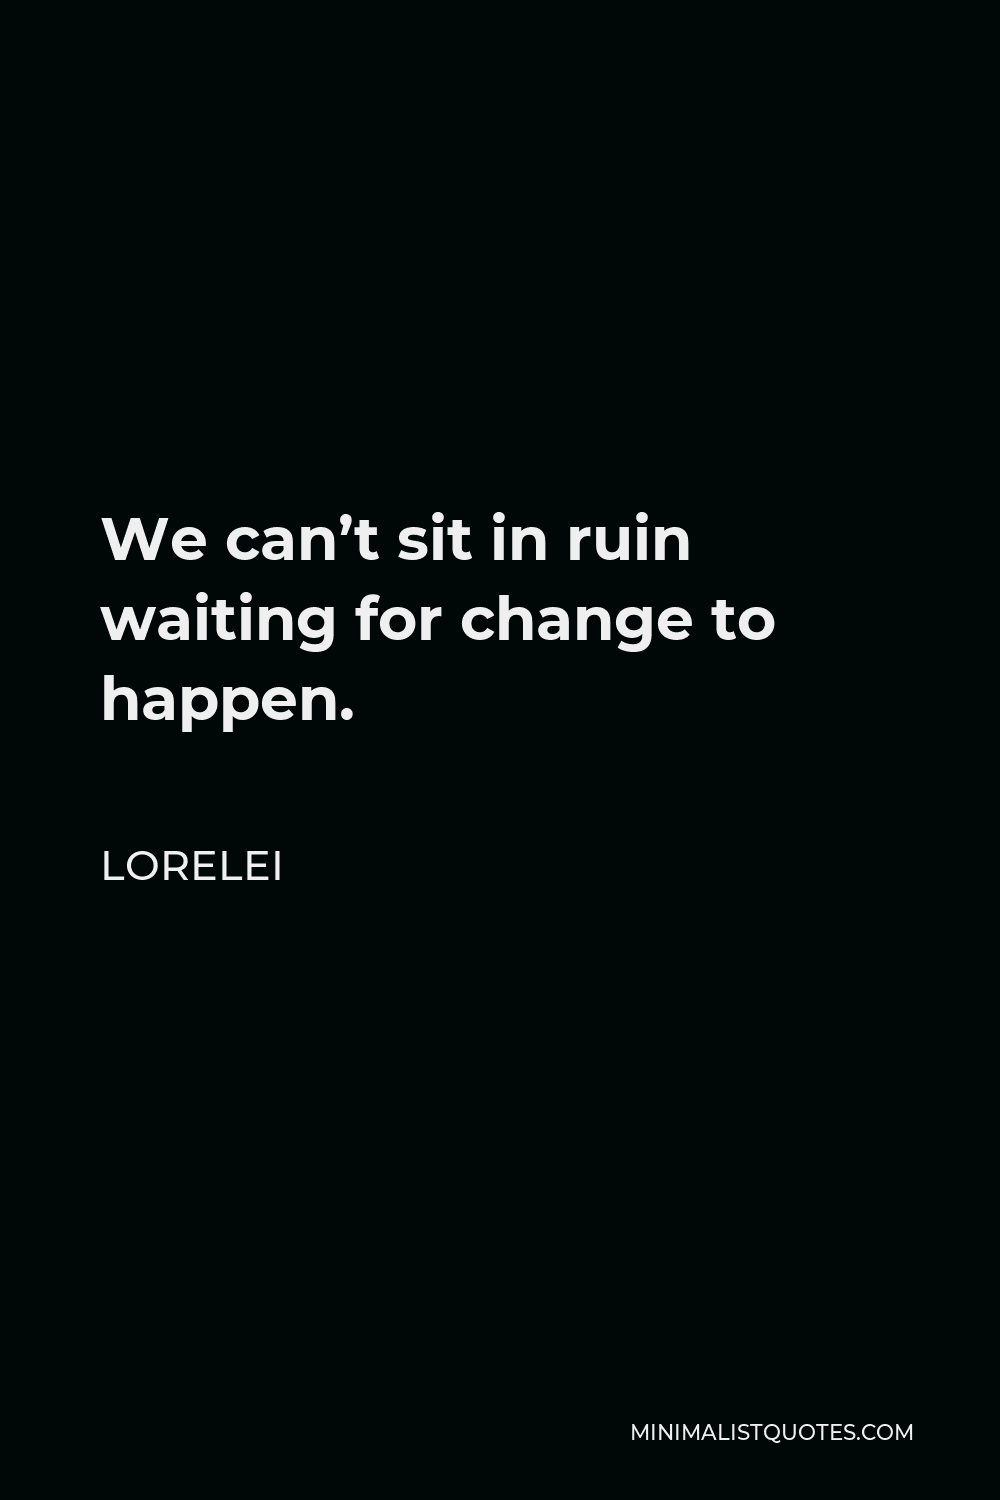 Lorelei Quote - We can’t sit in ruin waiting for change to happen.